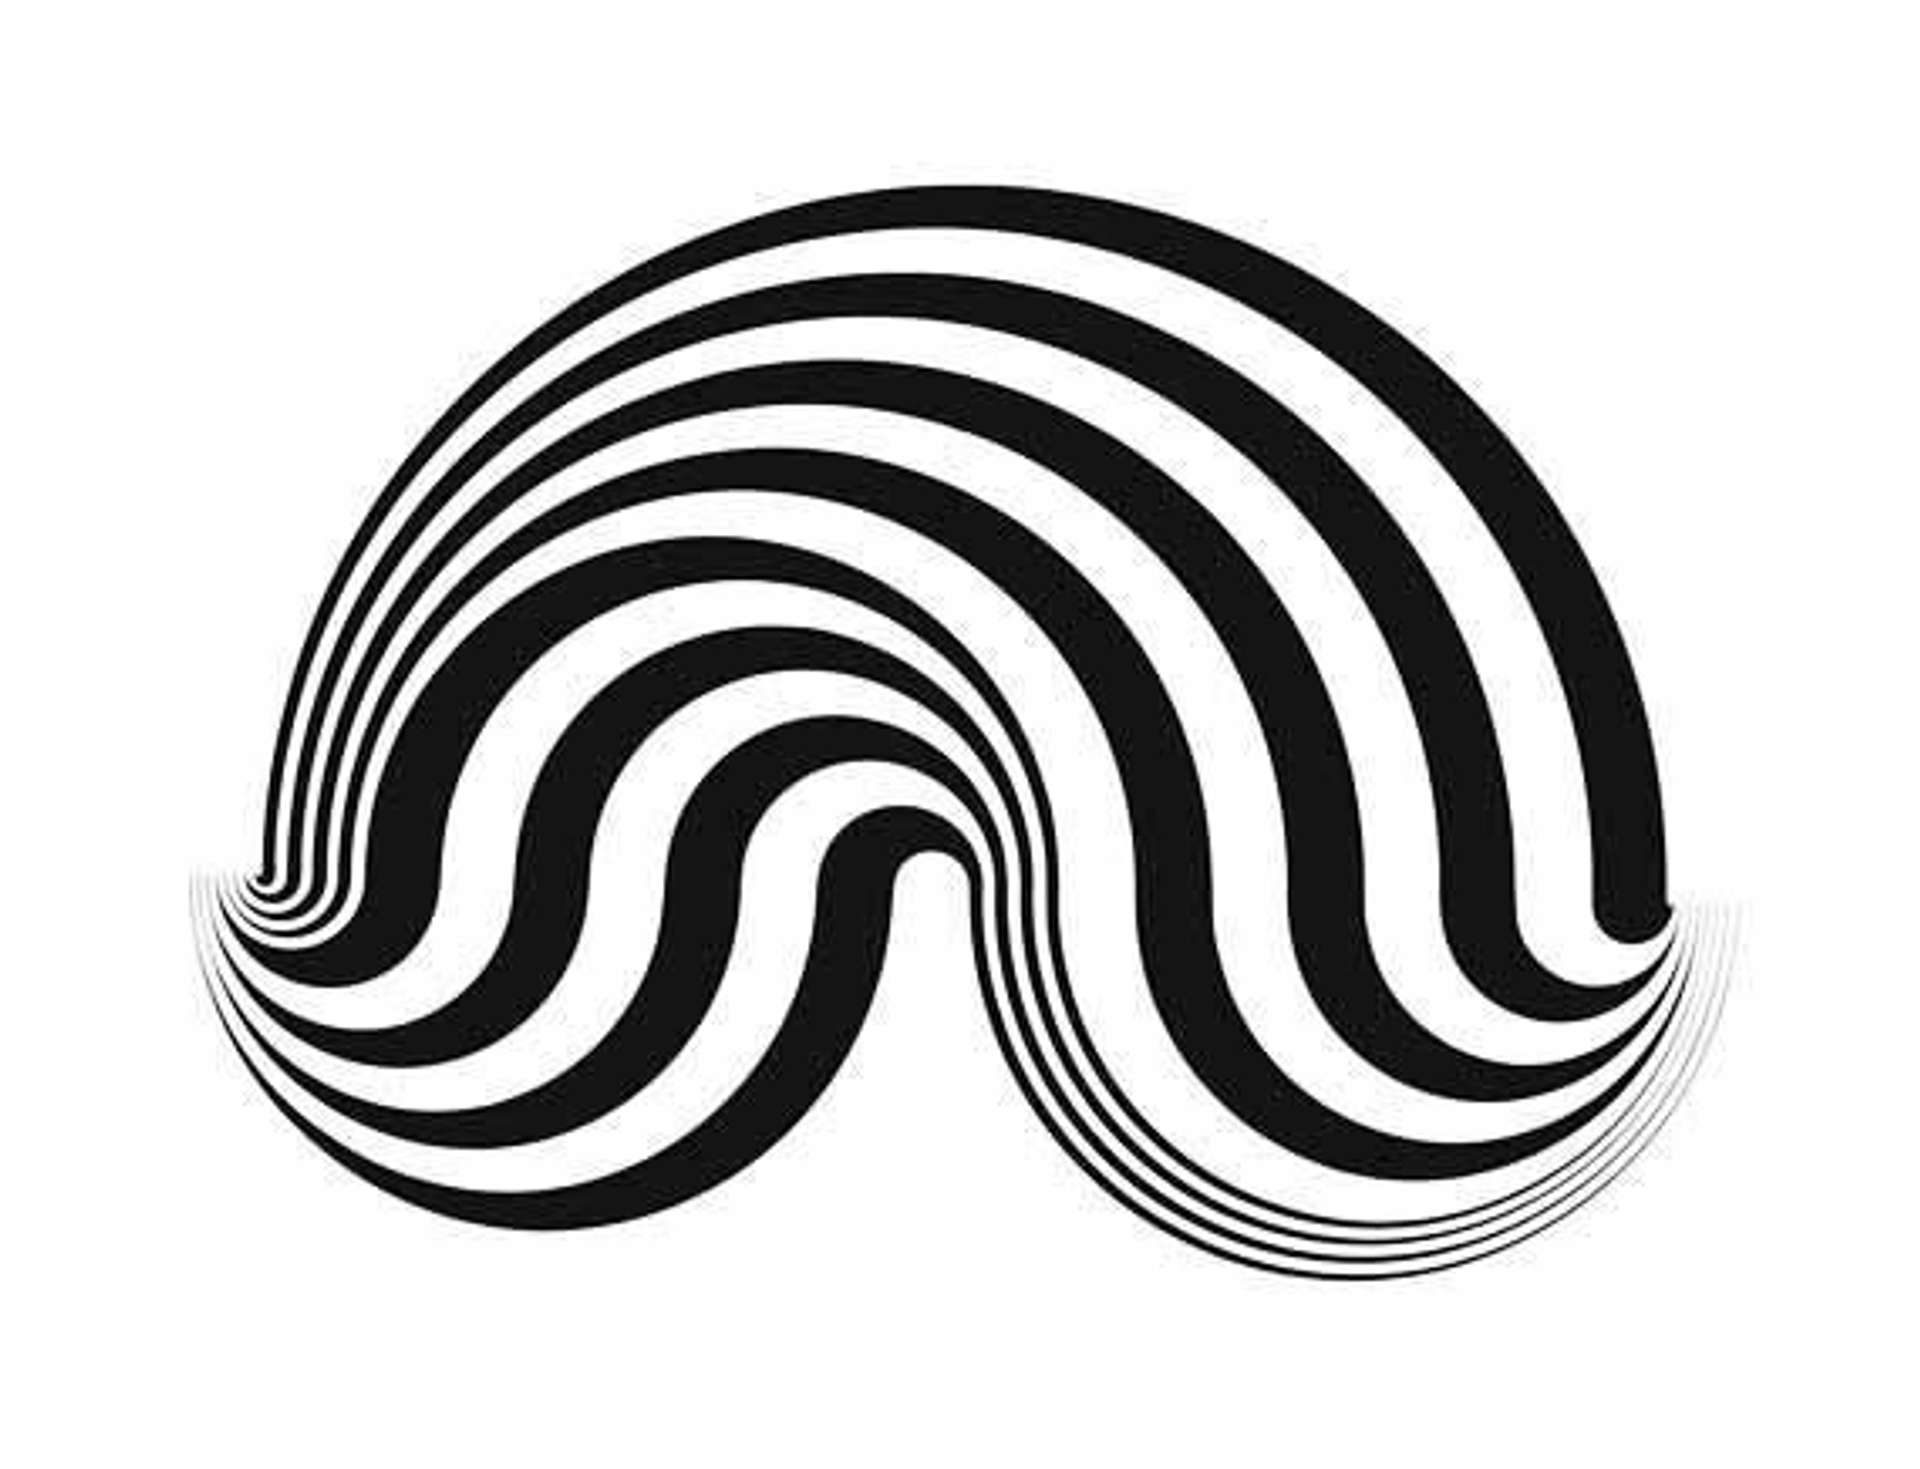 Bridget Riley’s Fragment 5. A black and white optical illusion of a warmed geometric shape